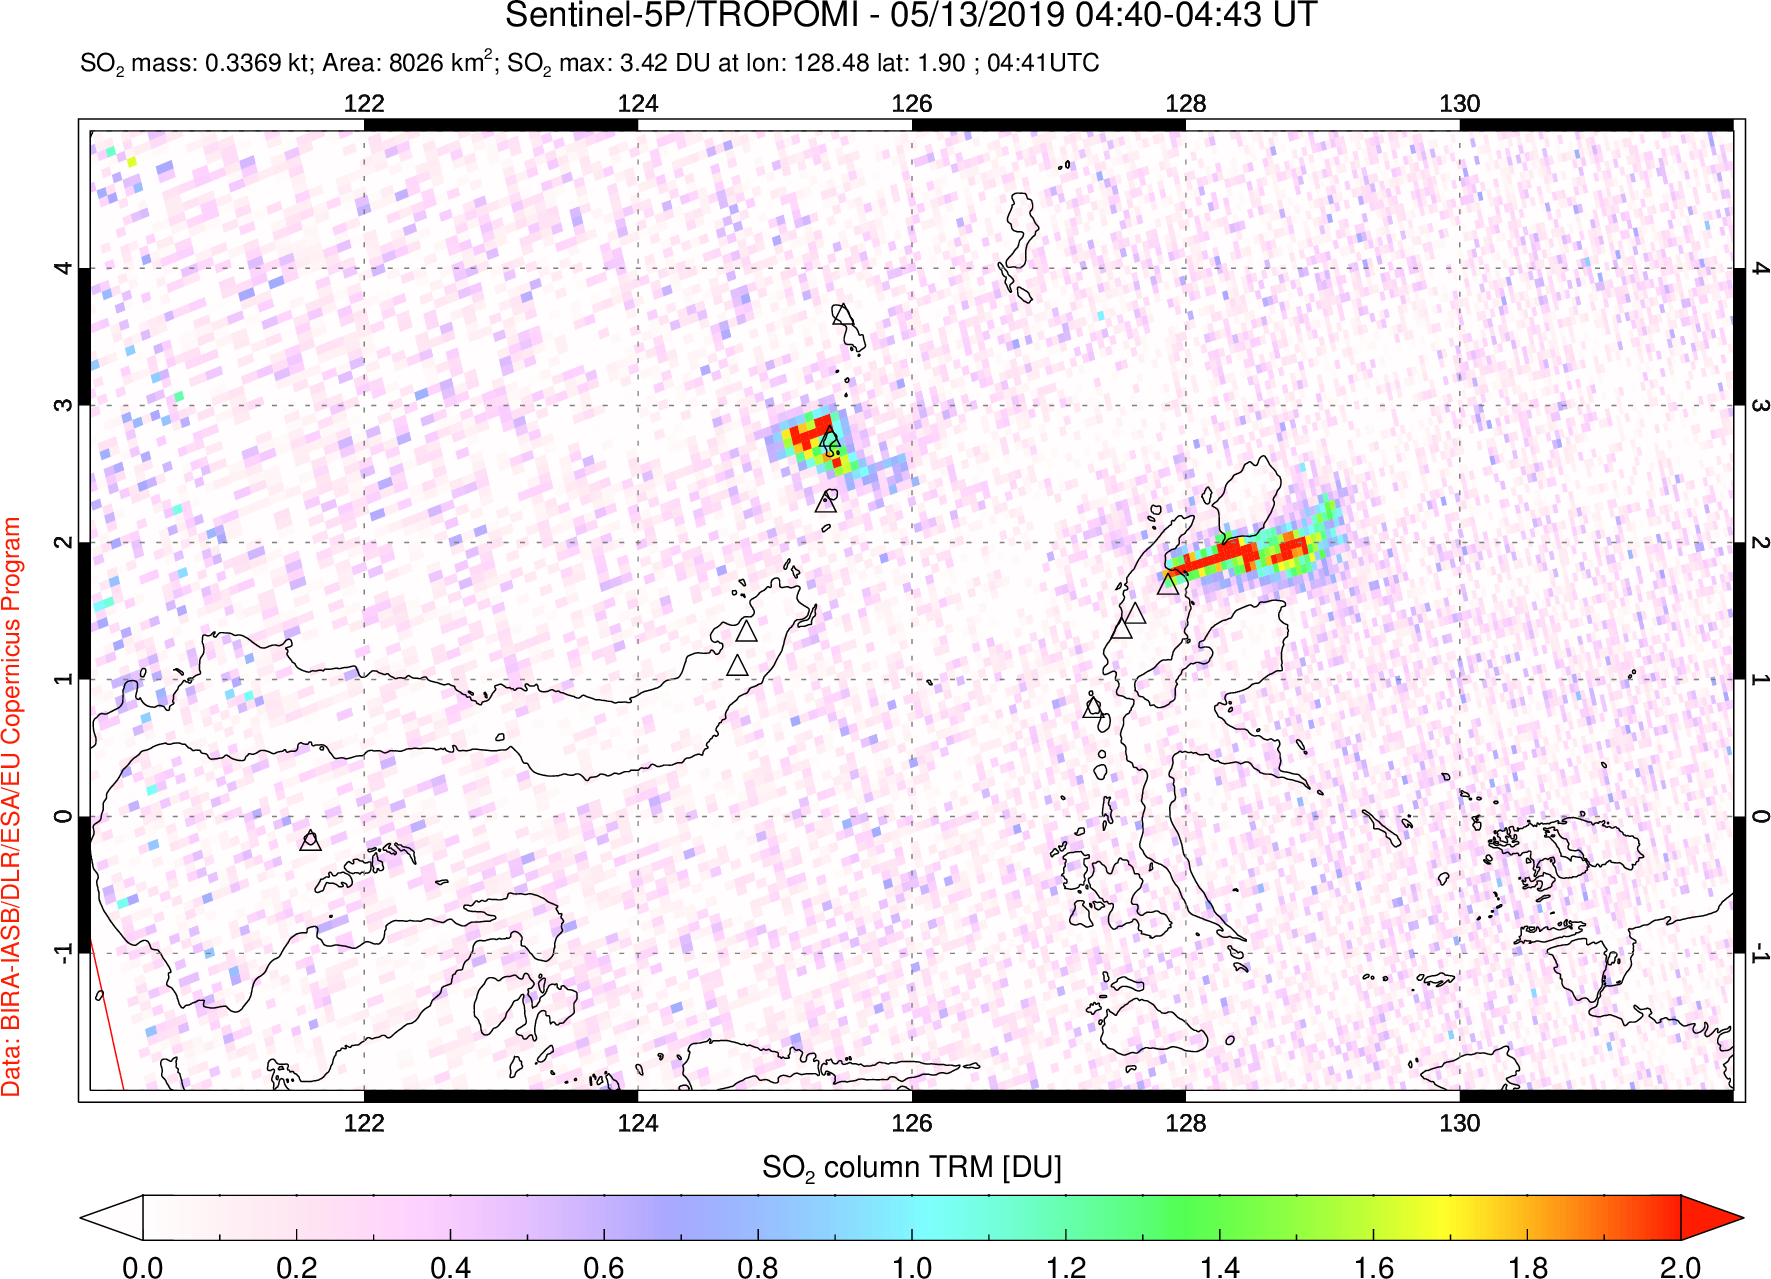 A sulfur dioxide image over Northern Sulawesi & Halmahera, Indonesia on May 13, 2019.